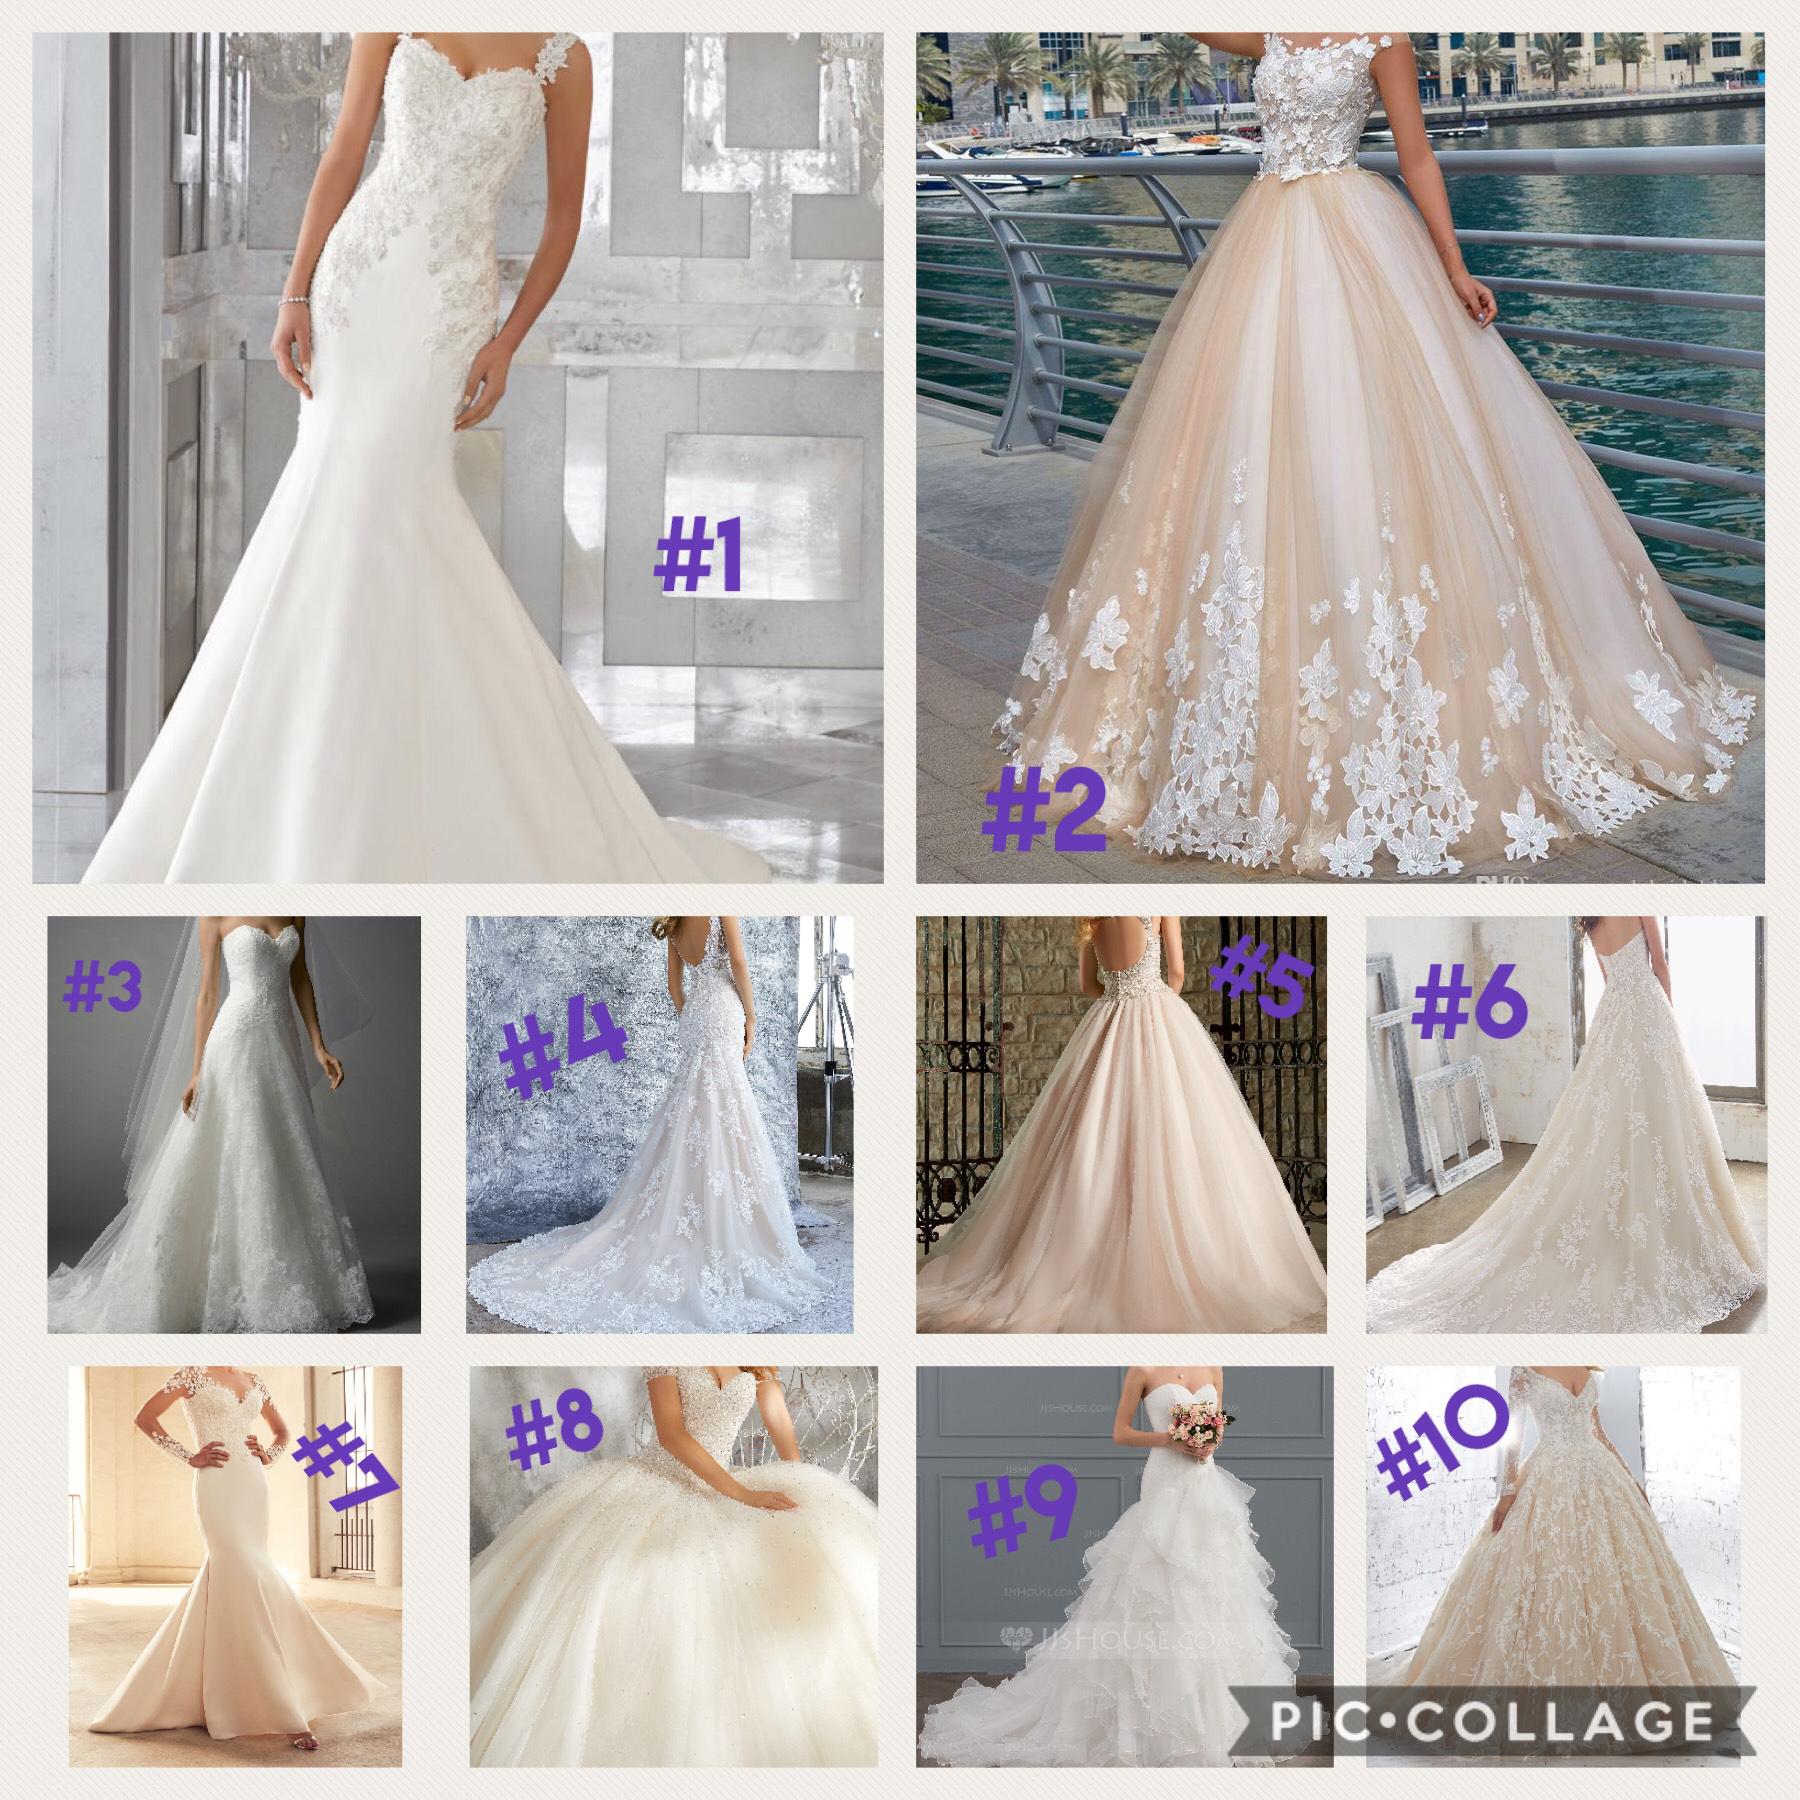 Which would you wear on your special day?